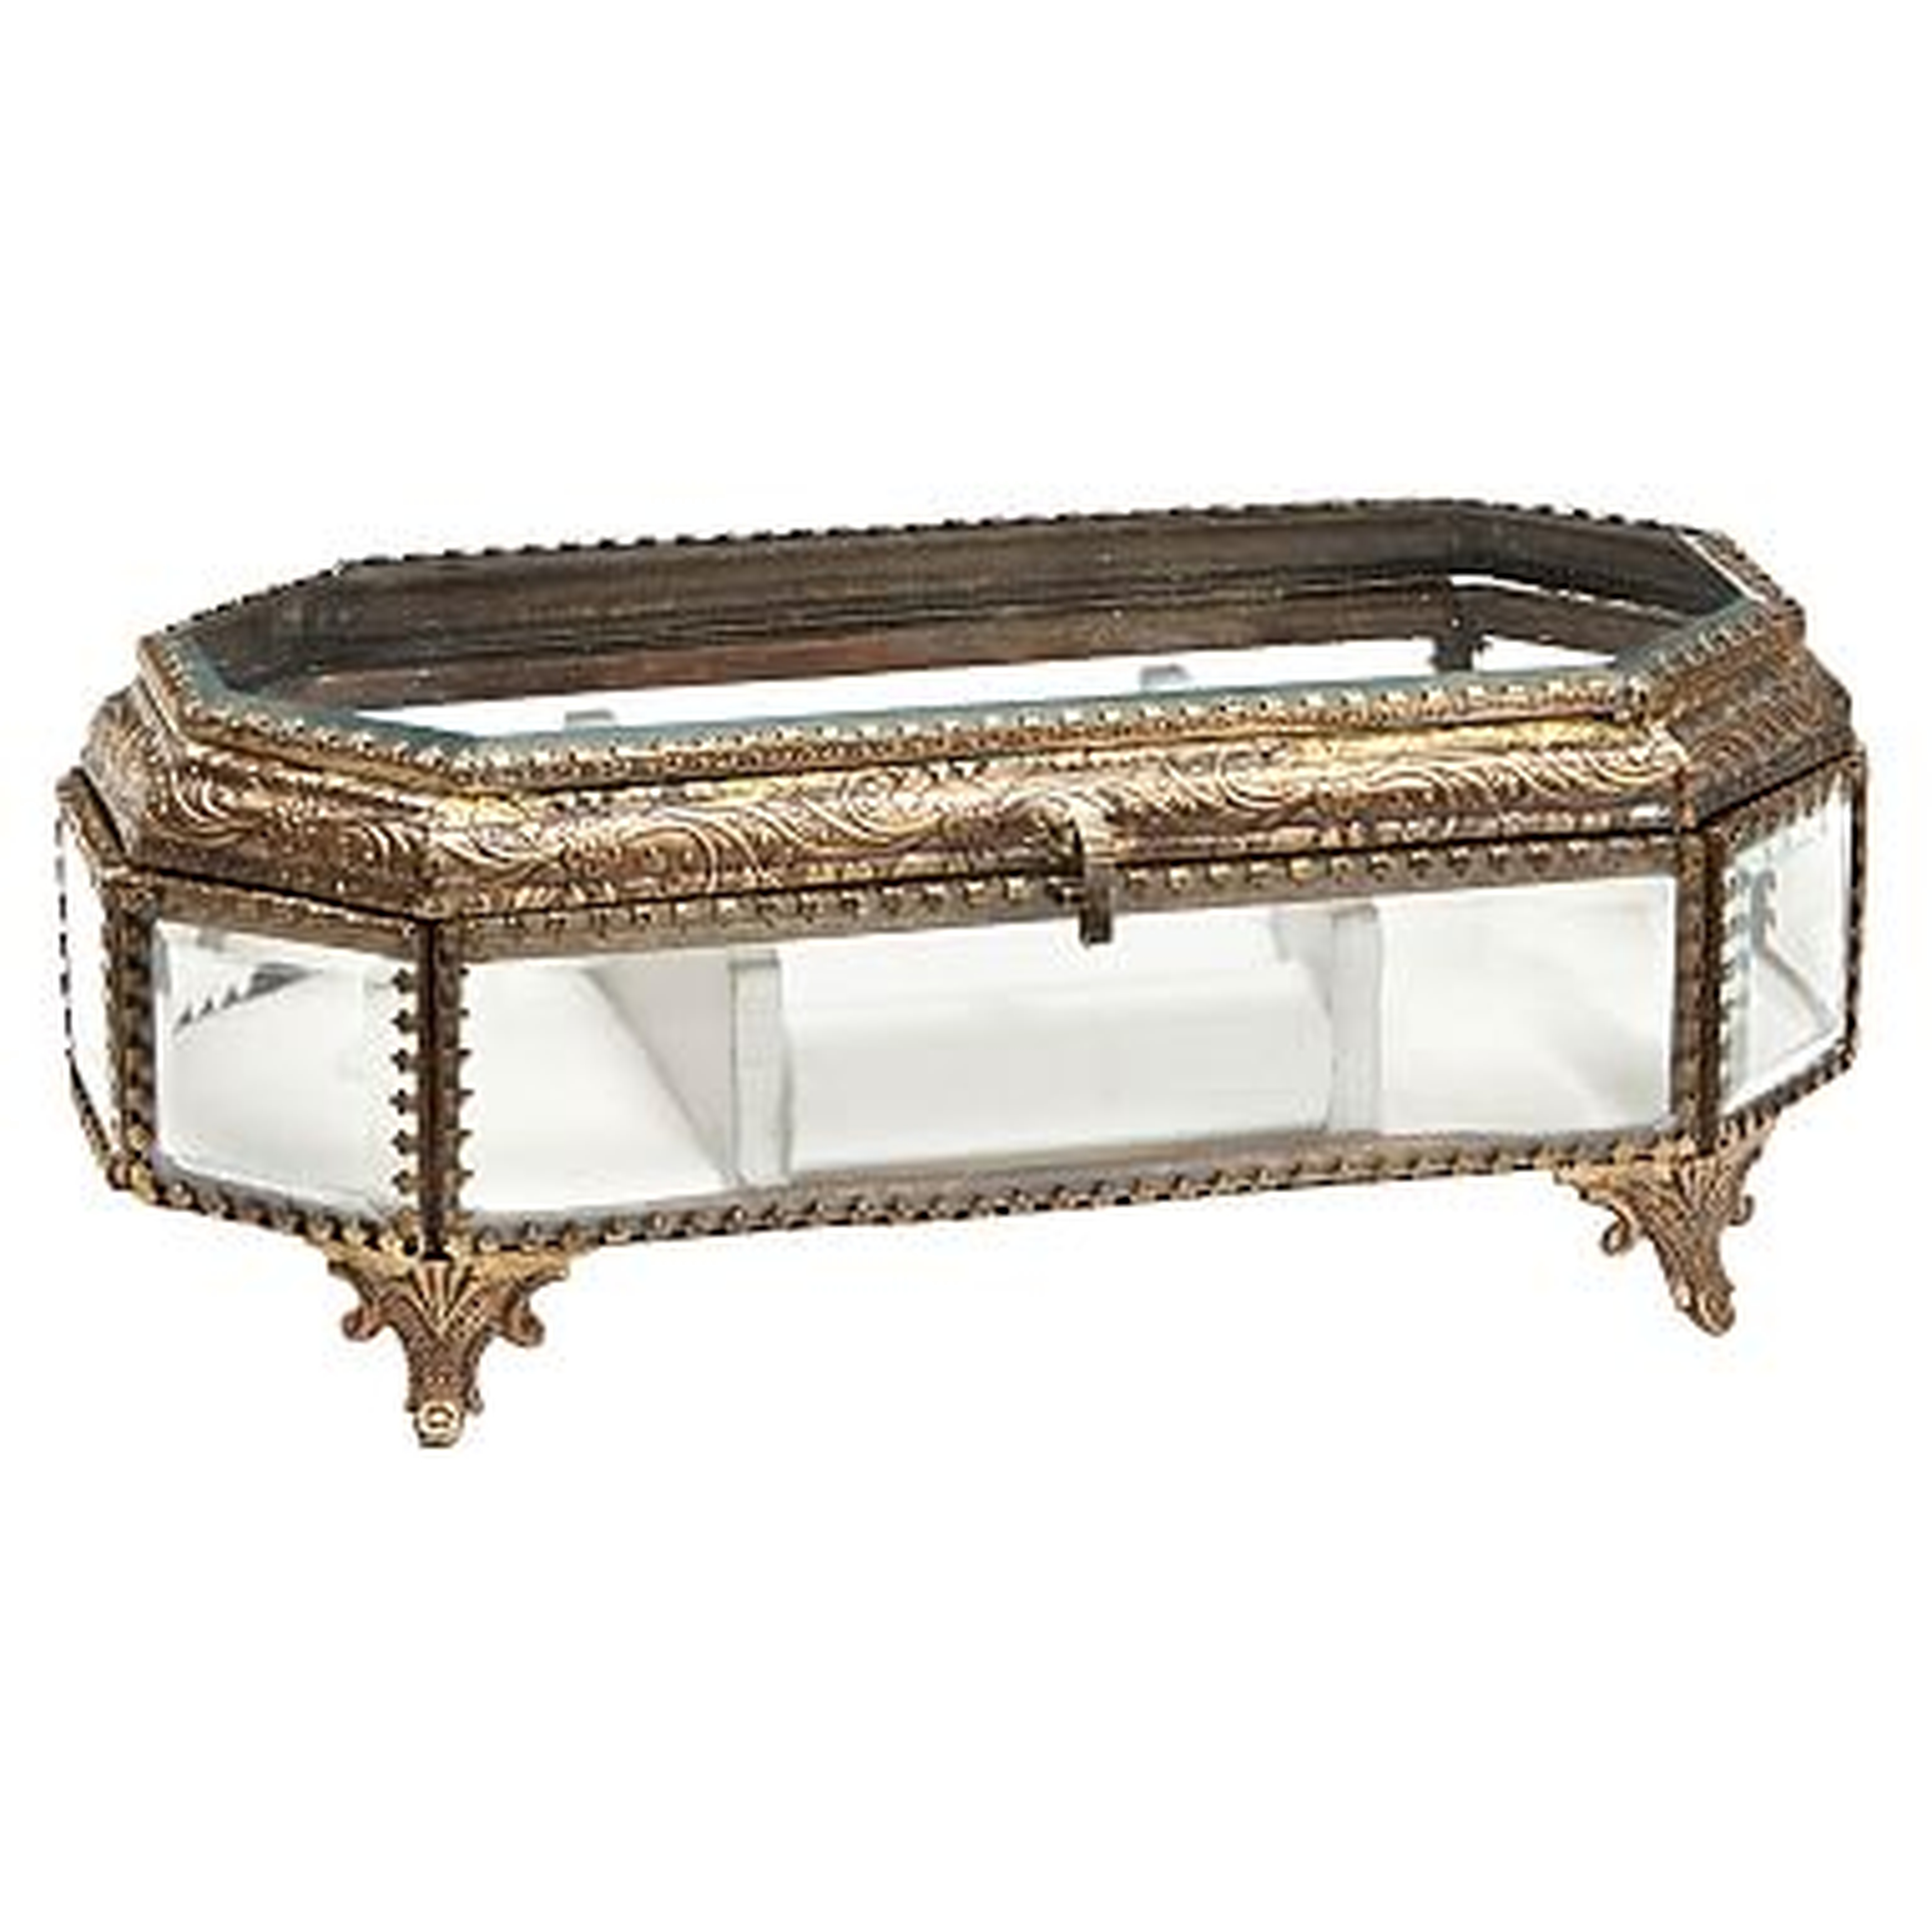 The Emily &amp; Meritt Wishbox Collection, Crown Jewel Jewelry Box, Gold and Glass - Pottery Barn Teen